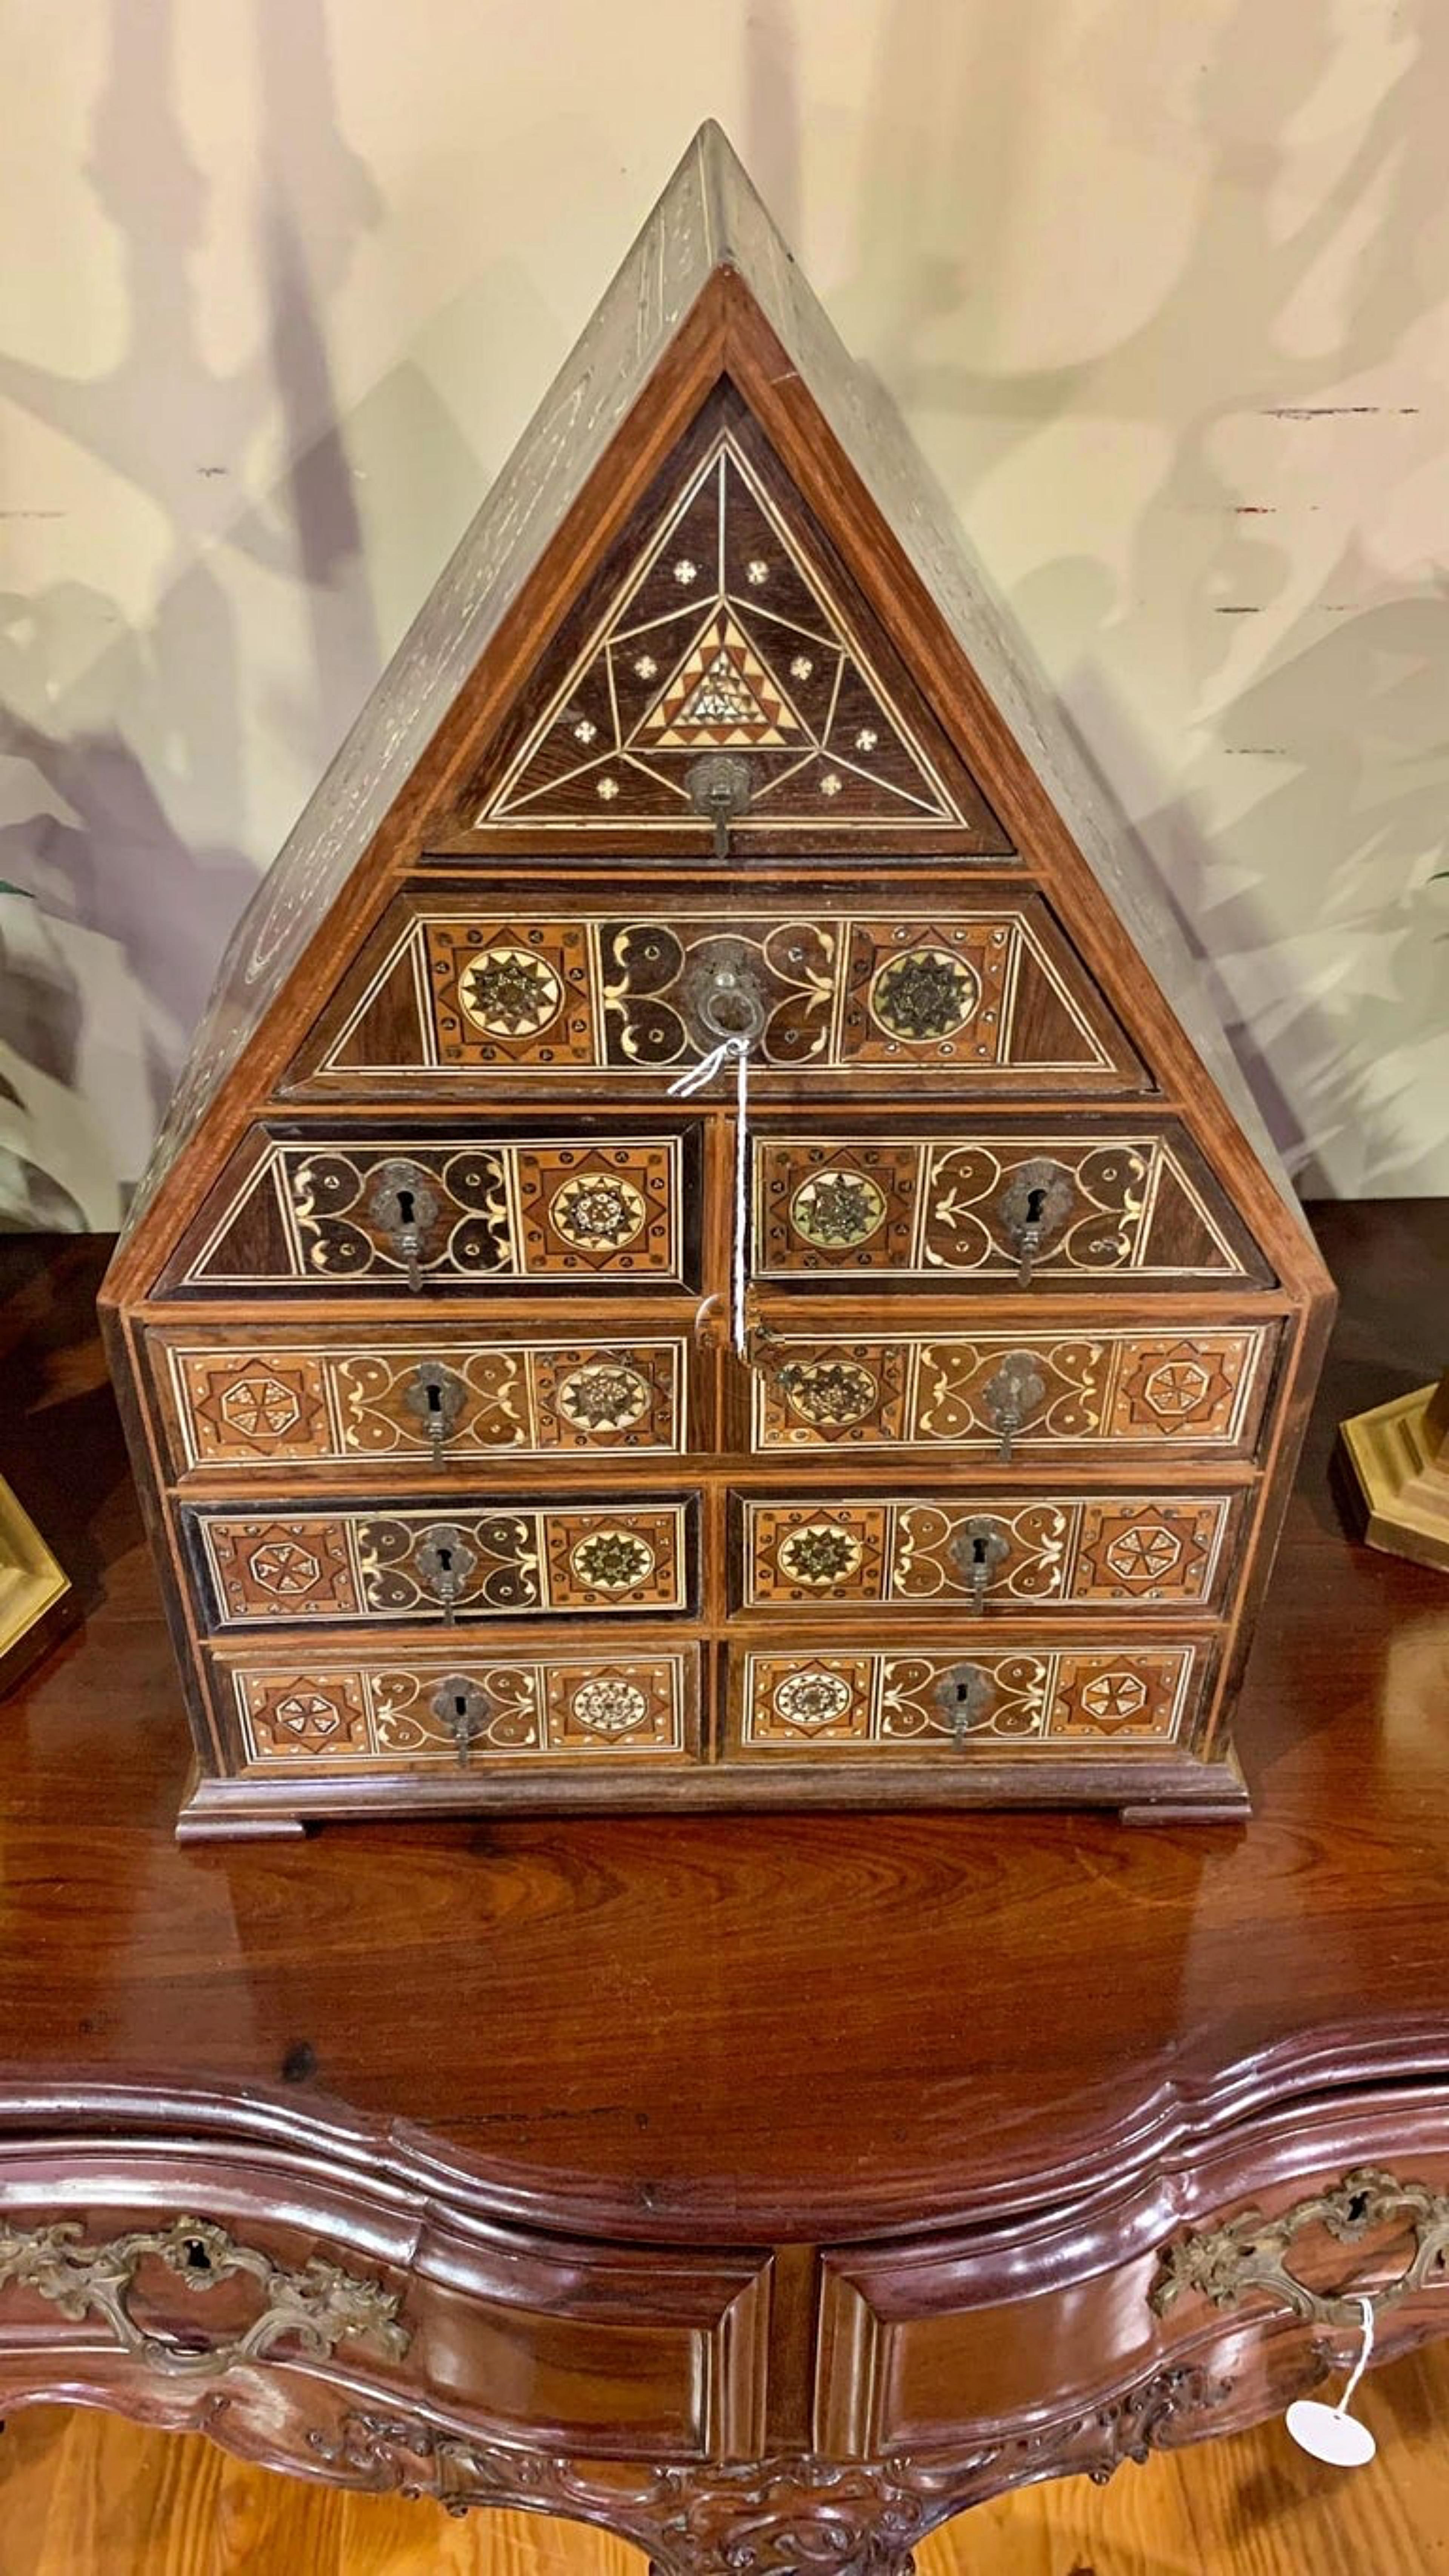 RARE CENTER CHAPEL COUNTER 16th Century

Lusíada - Portuguese in teak,
Partial sissoo coating with ivory inlays, with 9 drawers simulating 10.
Micromosaic in different materials, back with partial sissoo coating with ivory fillets 